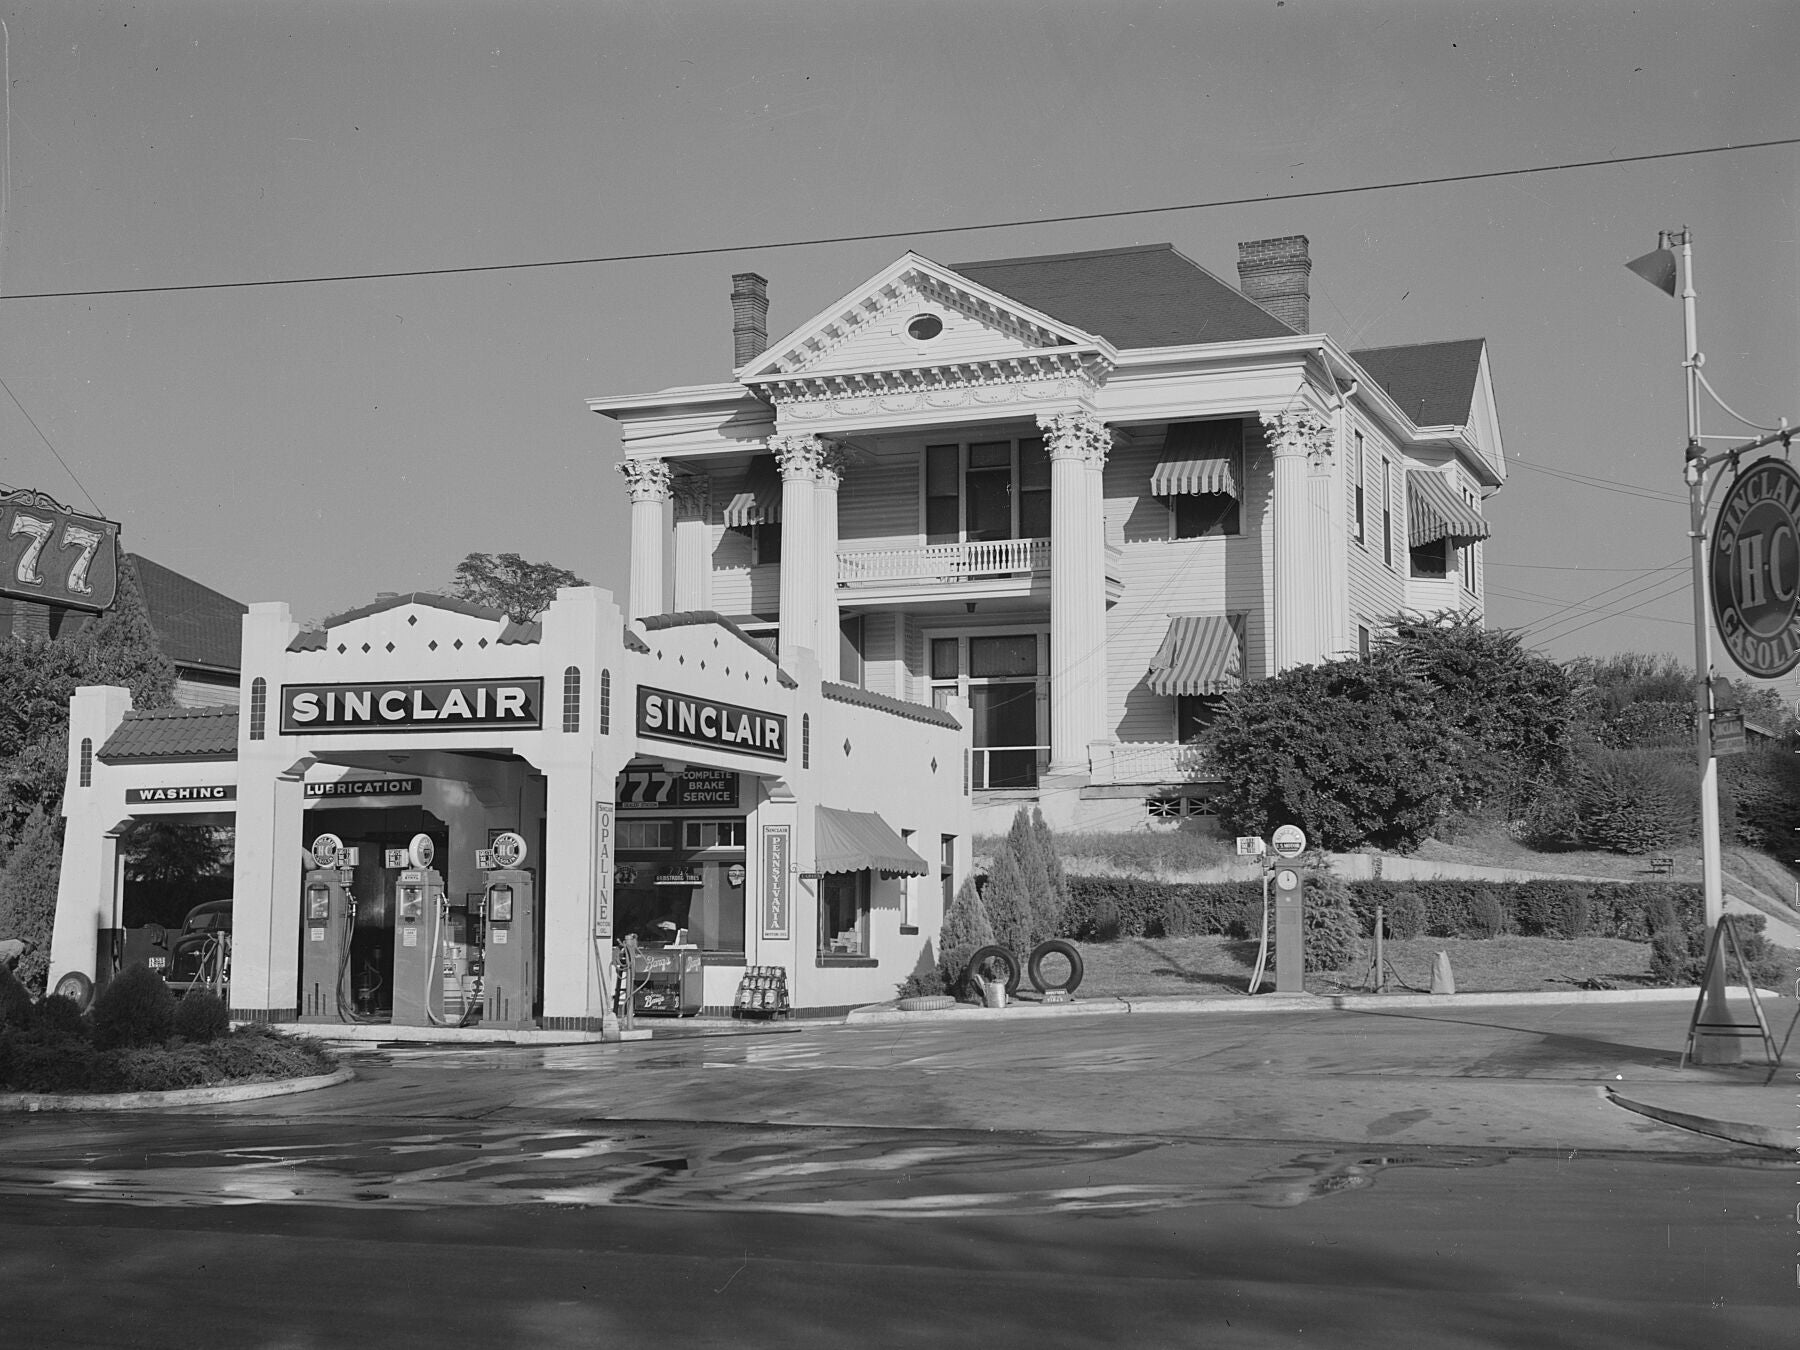 Gas station in front of an old colonial house in Jackson, Mississippi Delta, Mississippi by Marion Post Wolcott, 1939